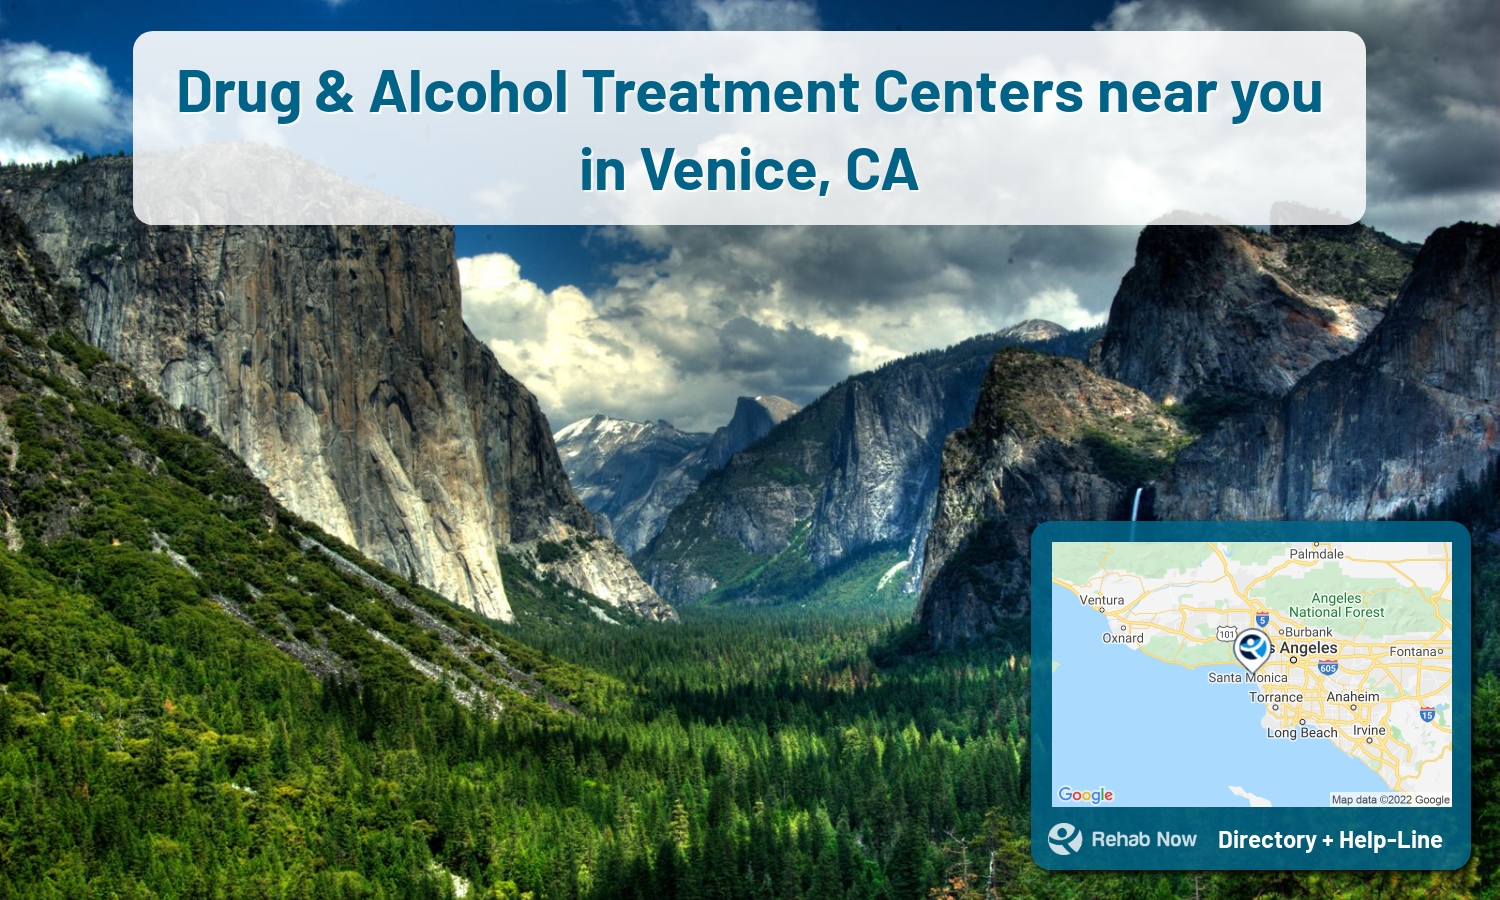 Ready to pick a rehab center in Venice? Get off alcohol, opiates, and other drugs, by selecting top drug rehab centers in California